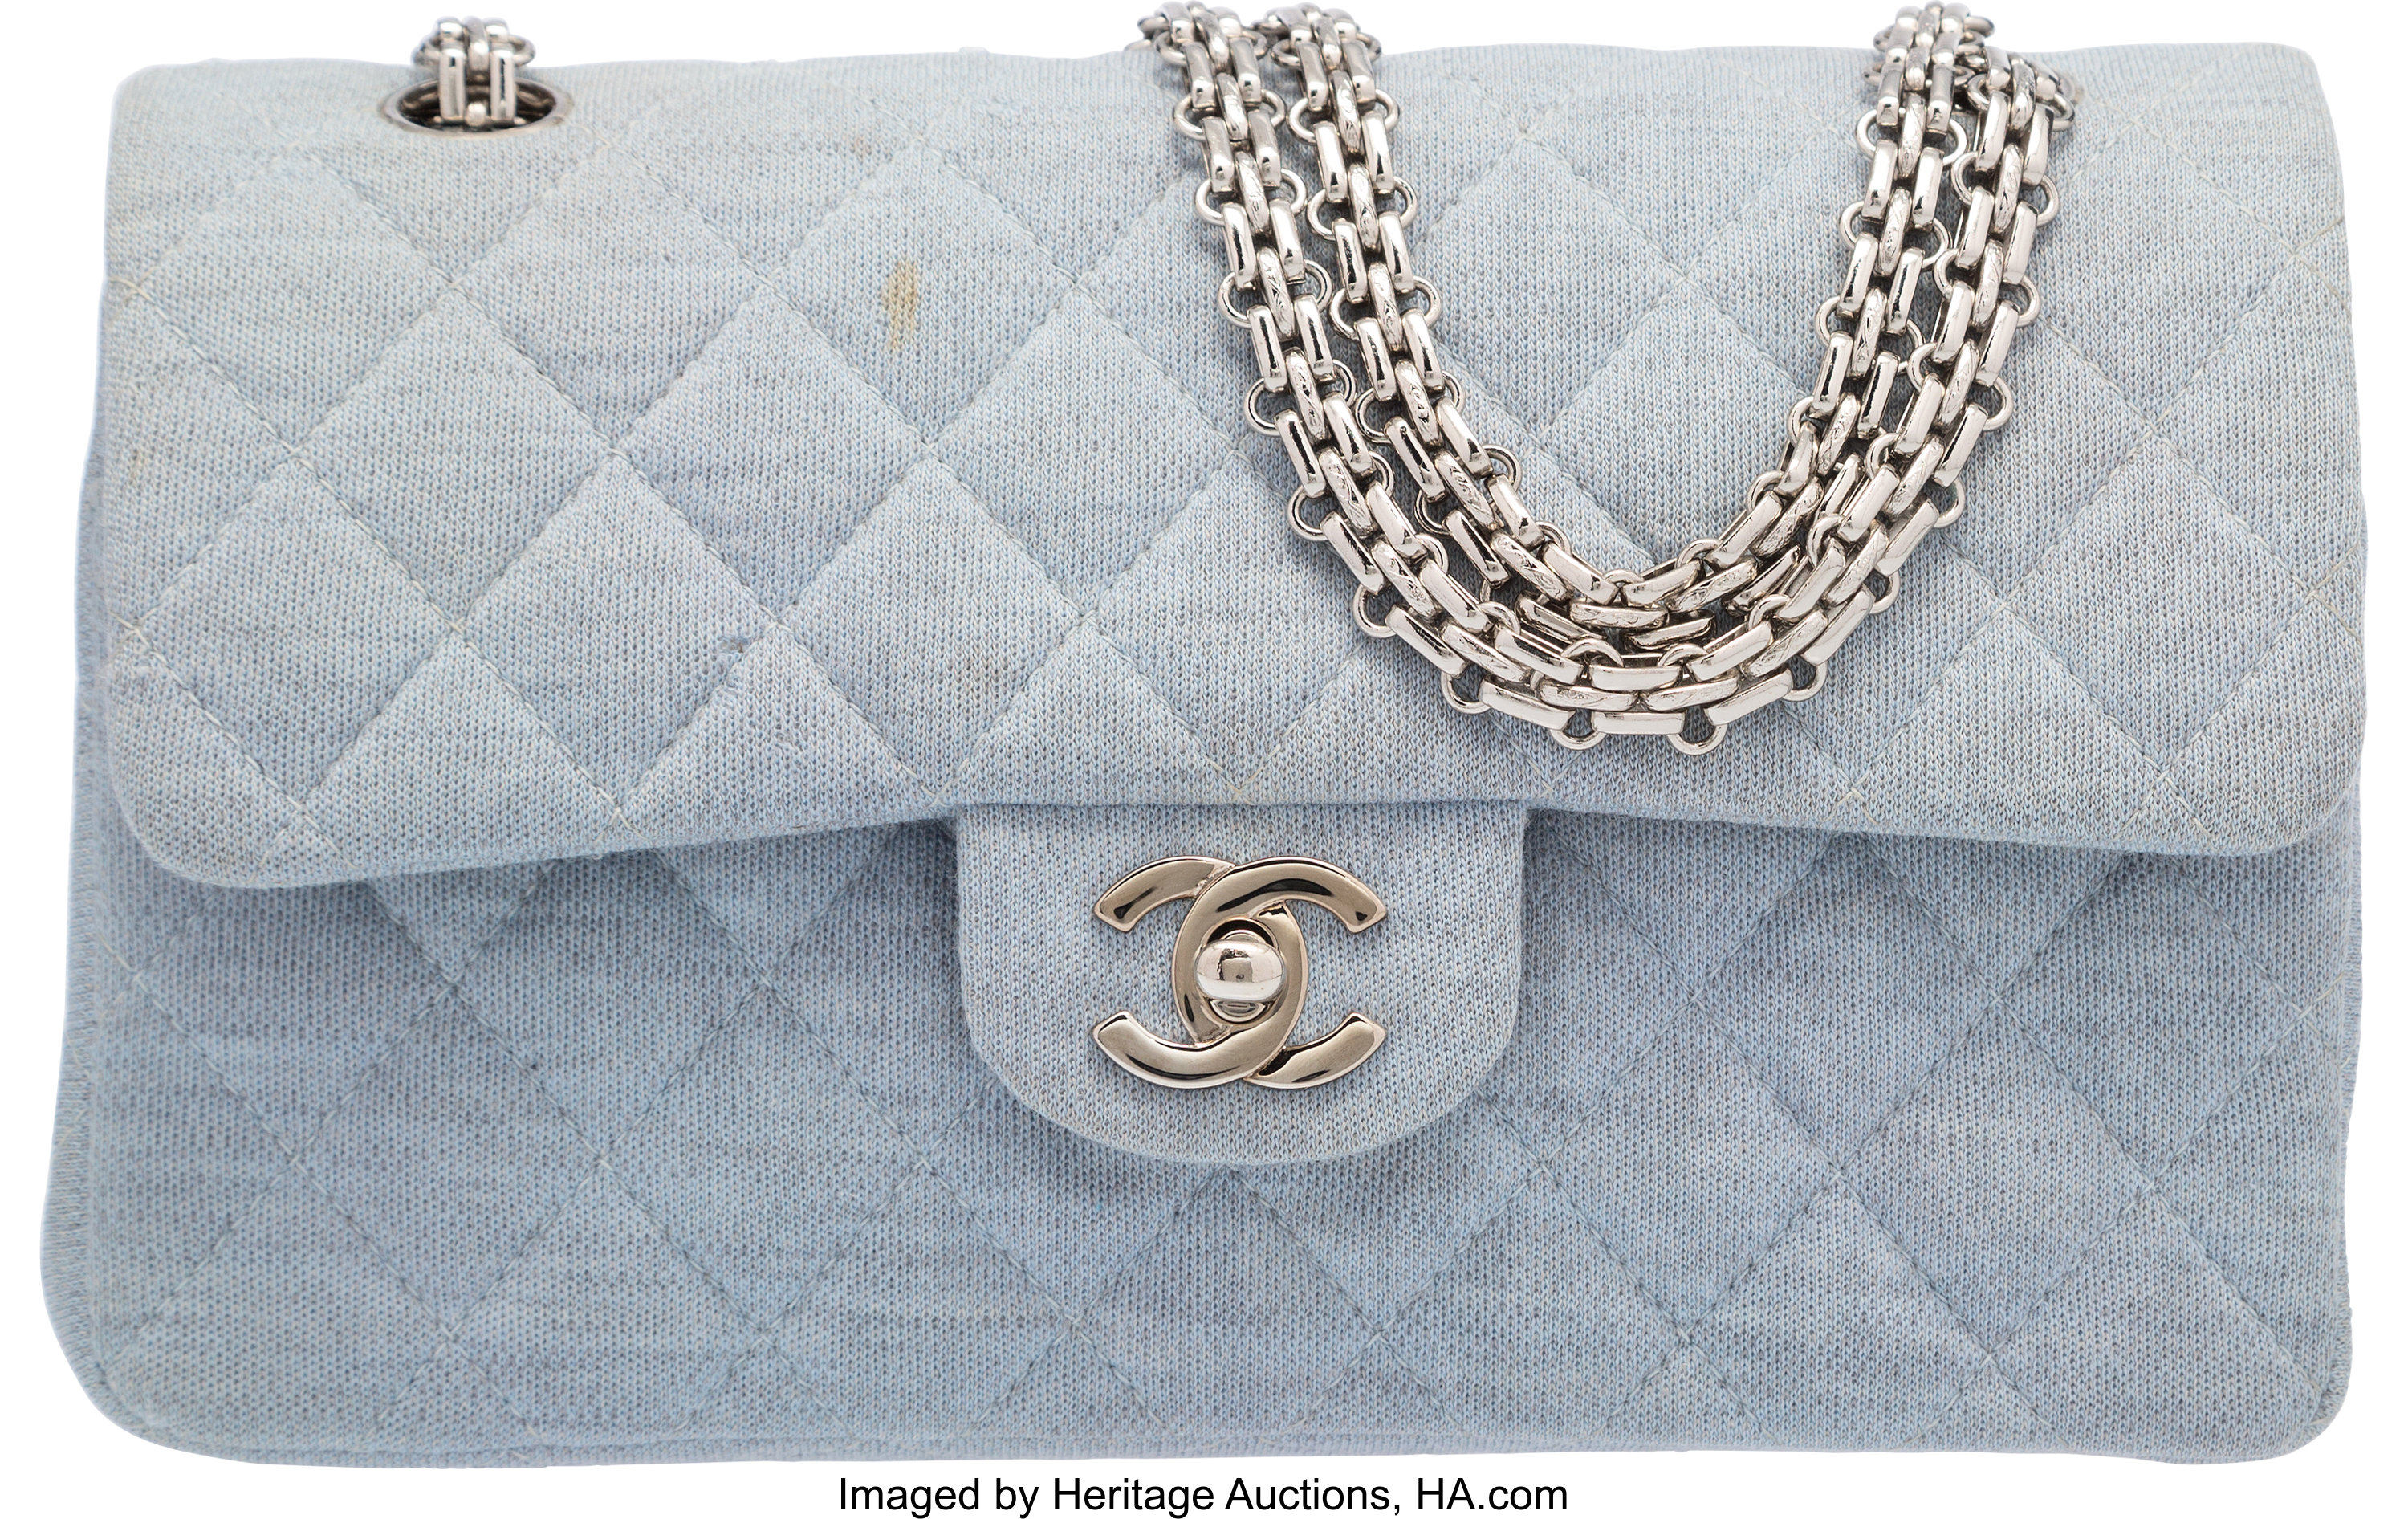 Chanel Blue Quilted Wool Small Double Flap Bag. Very Good to